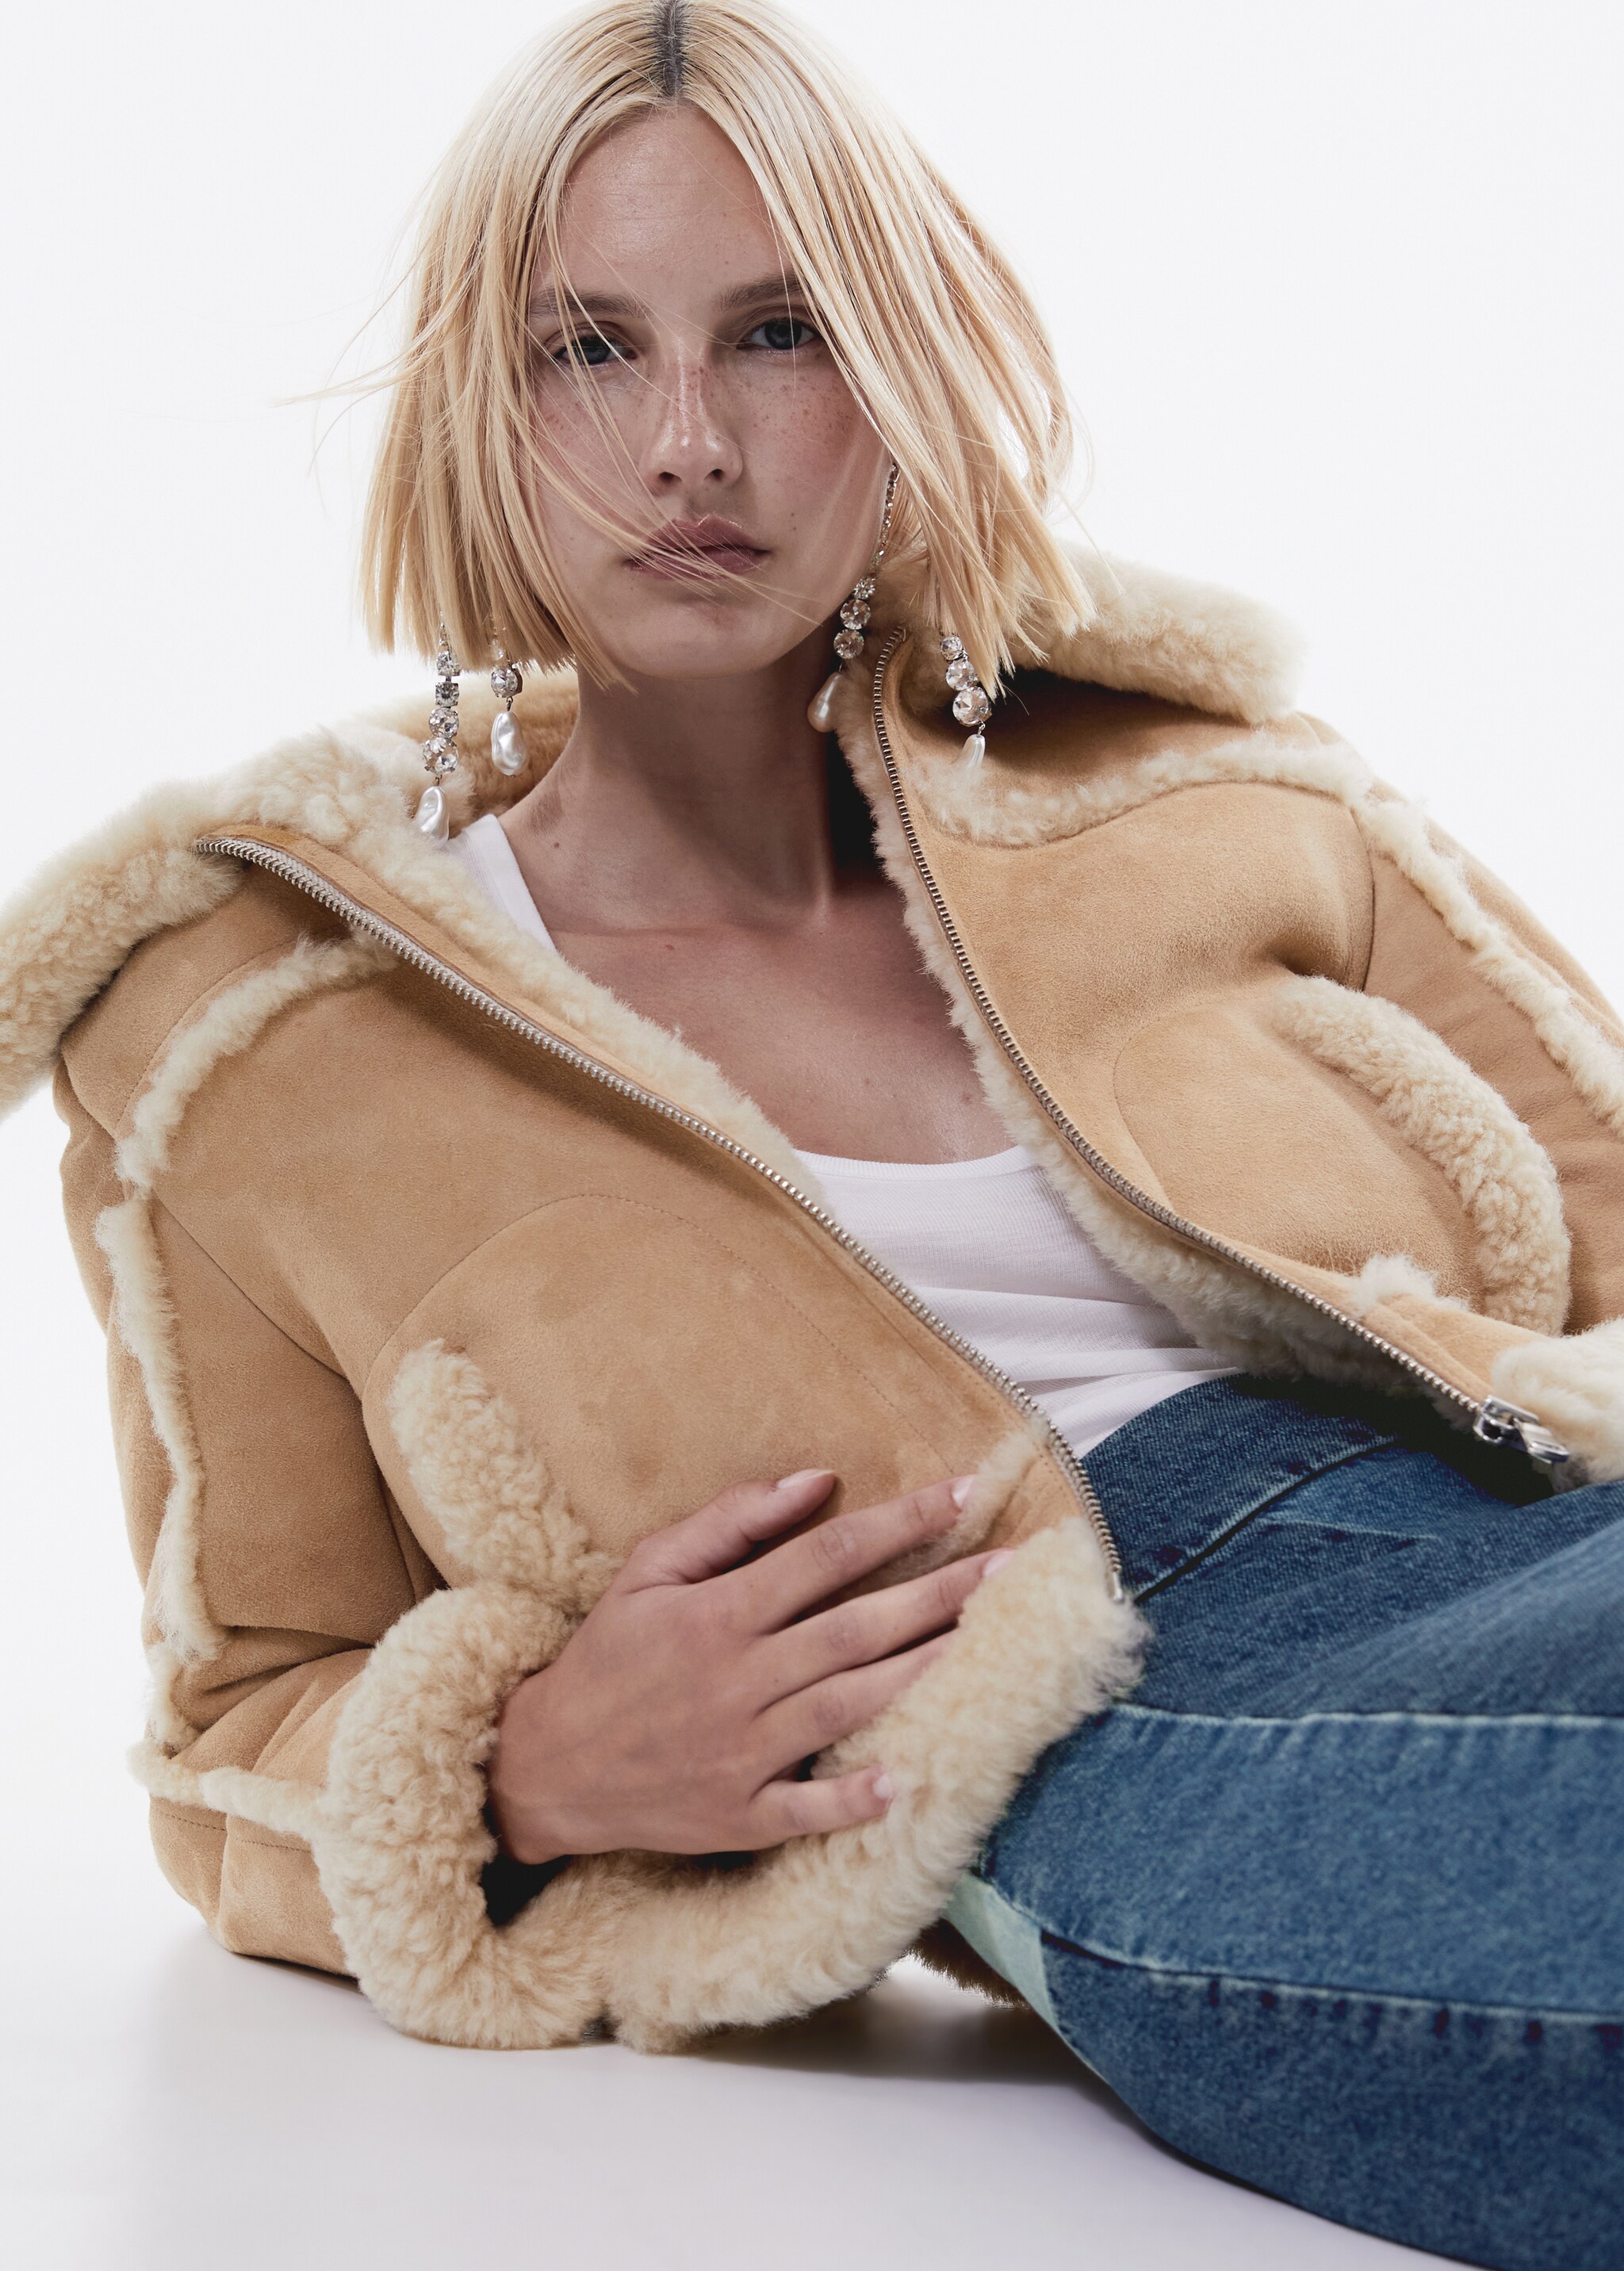 Shearling-lined leather jacket - Details of the article 2